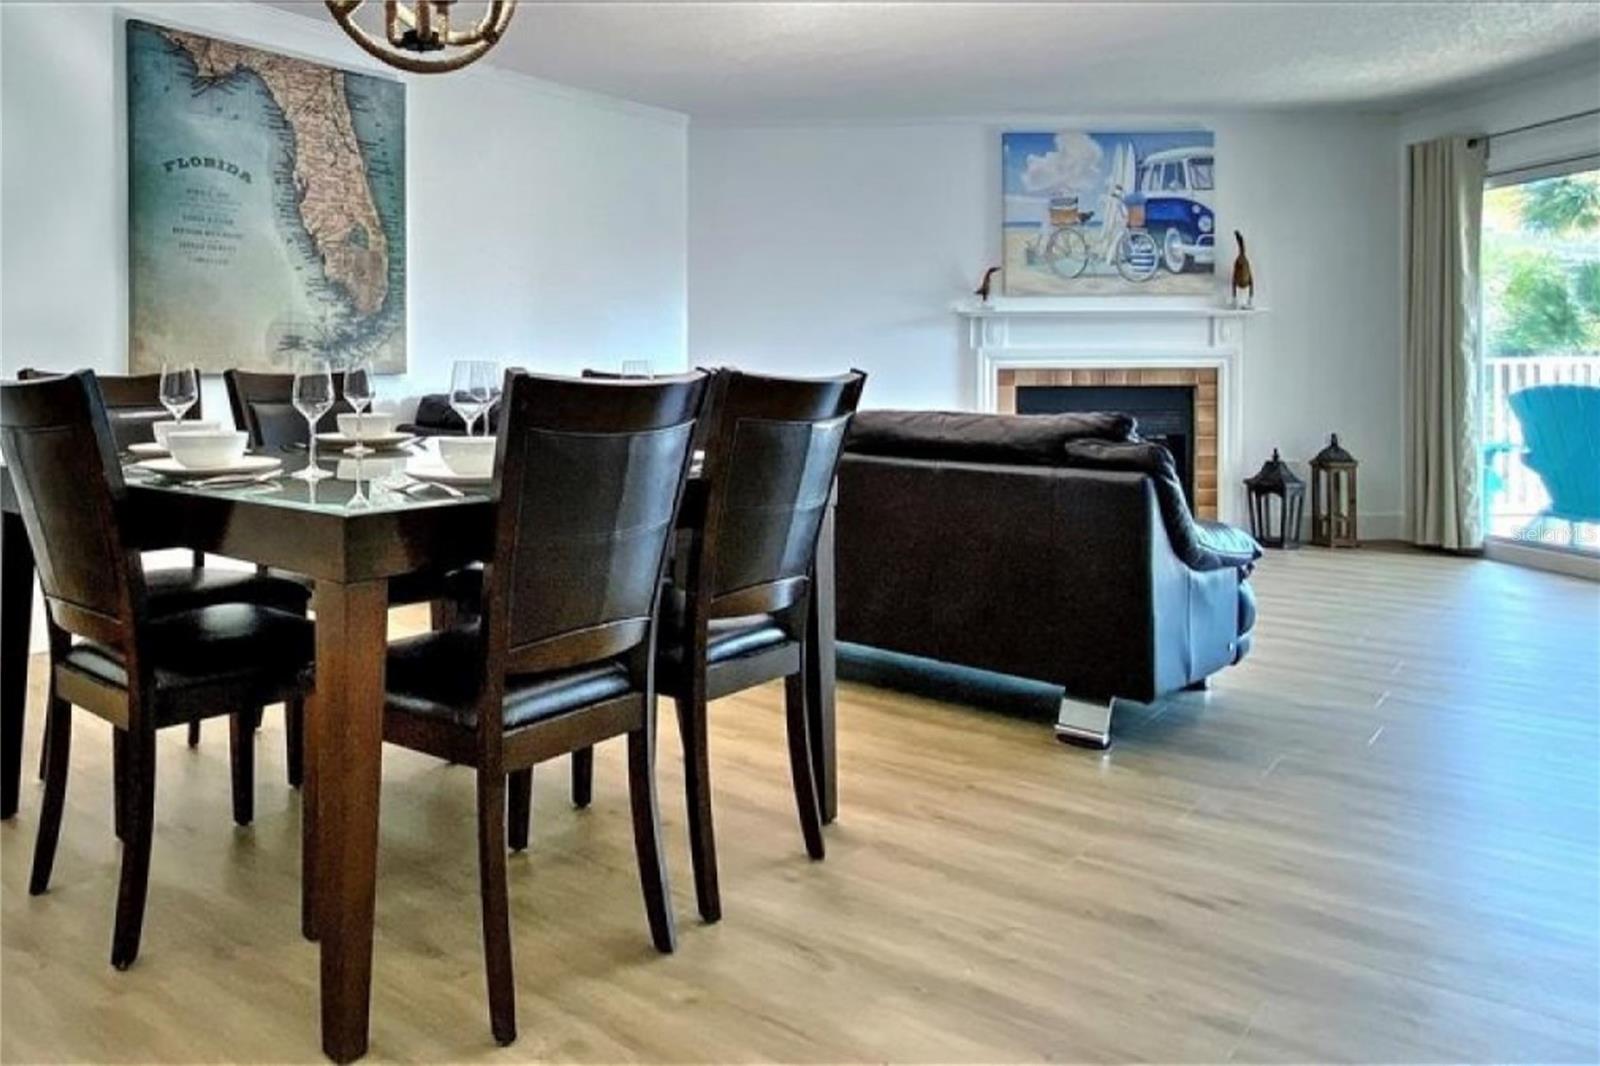 Open dining and living areas make entertaining or family time easy